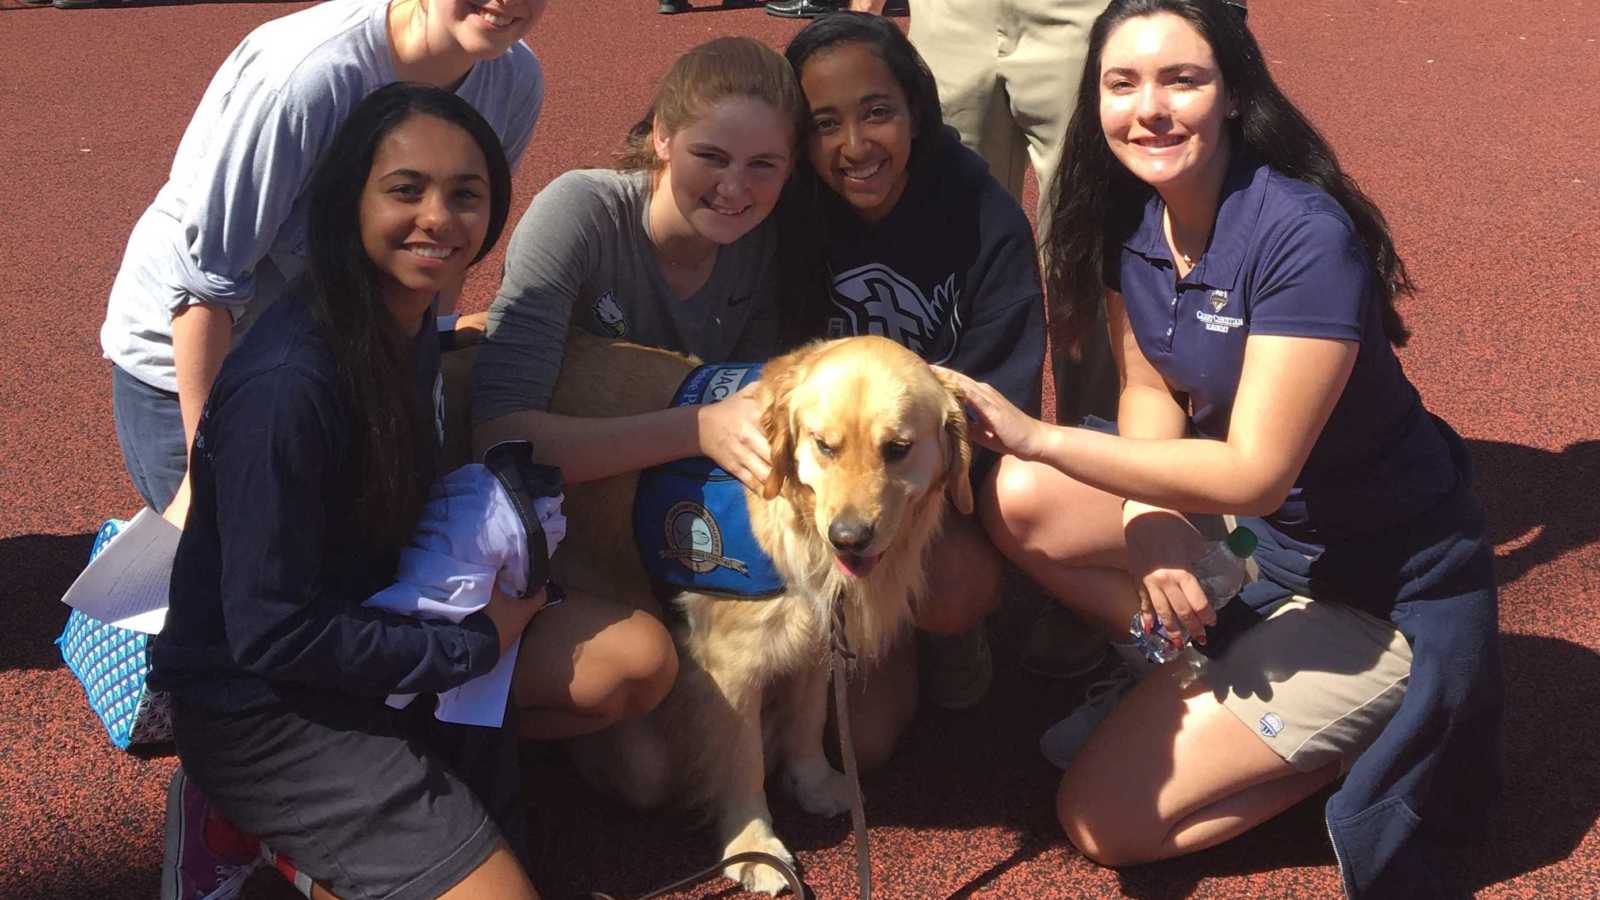 golden retriever with blue vest on stands while teen girls gather around crouching to pet dog